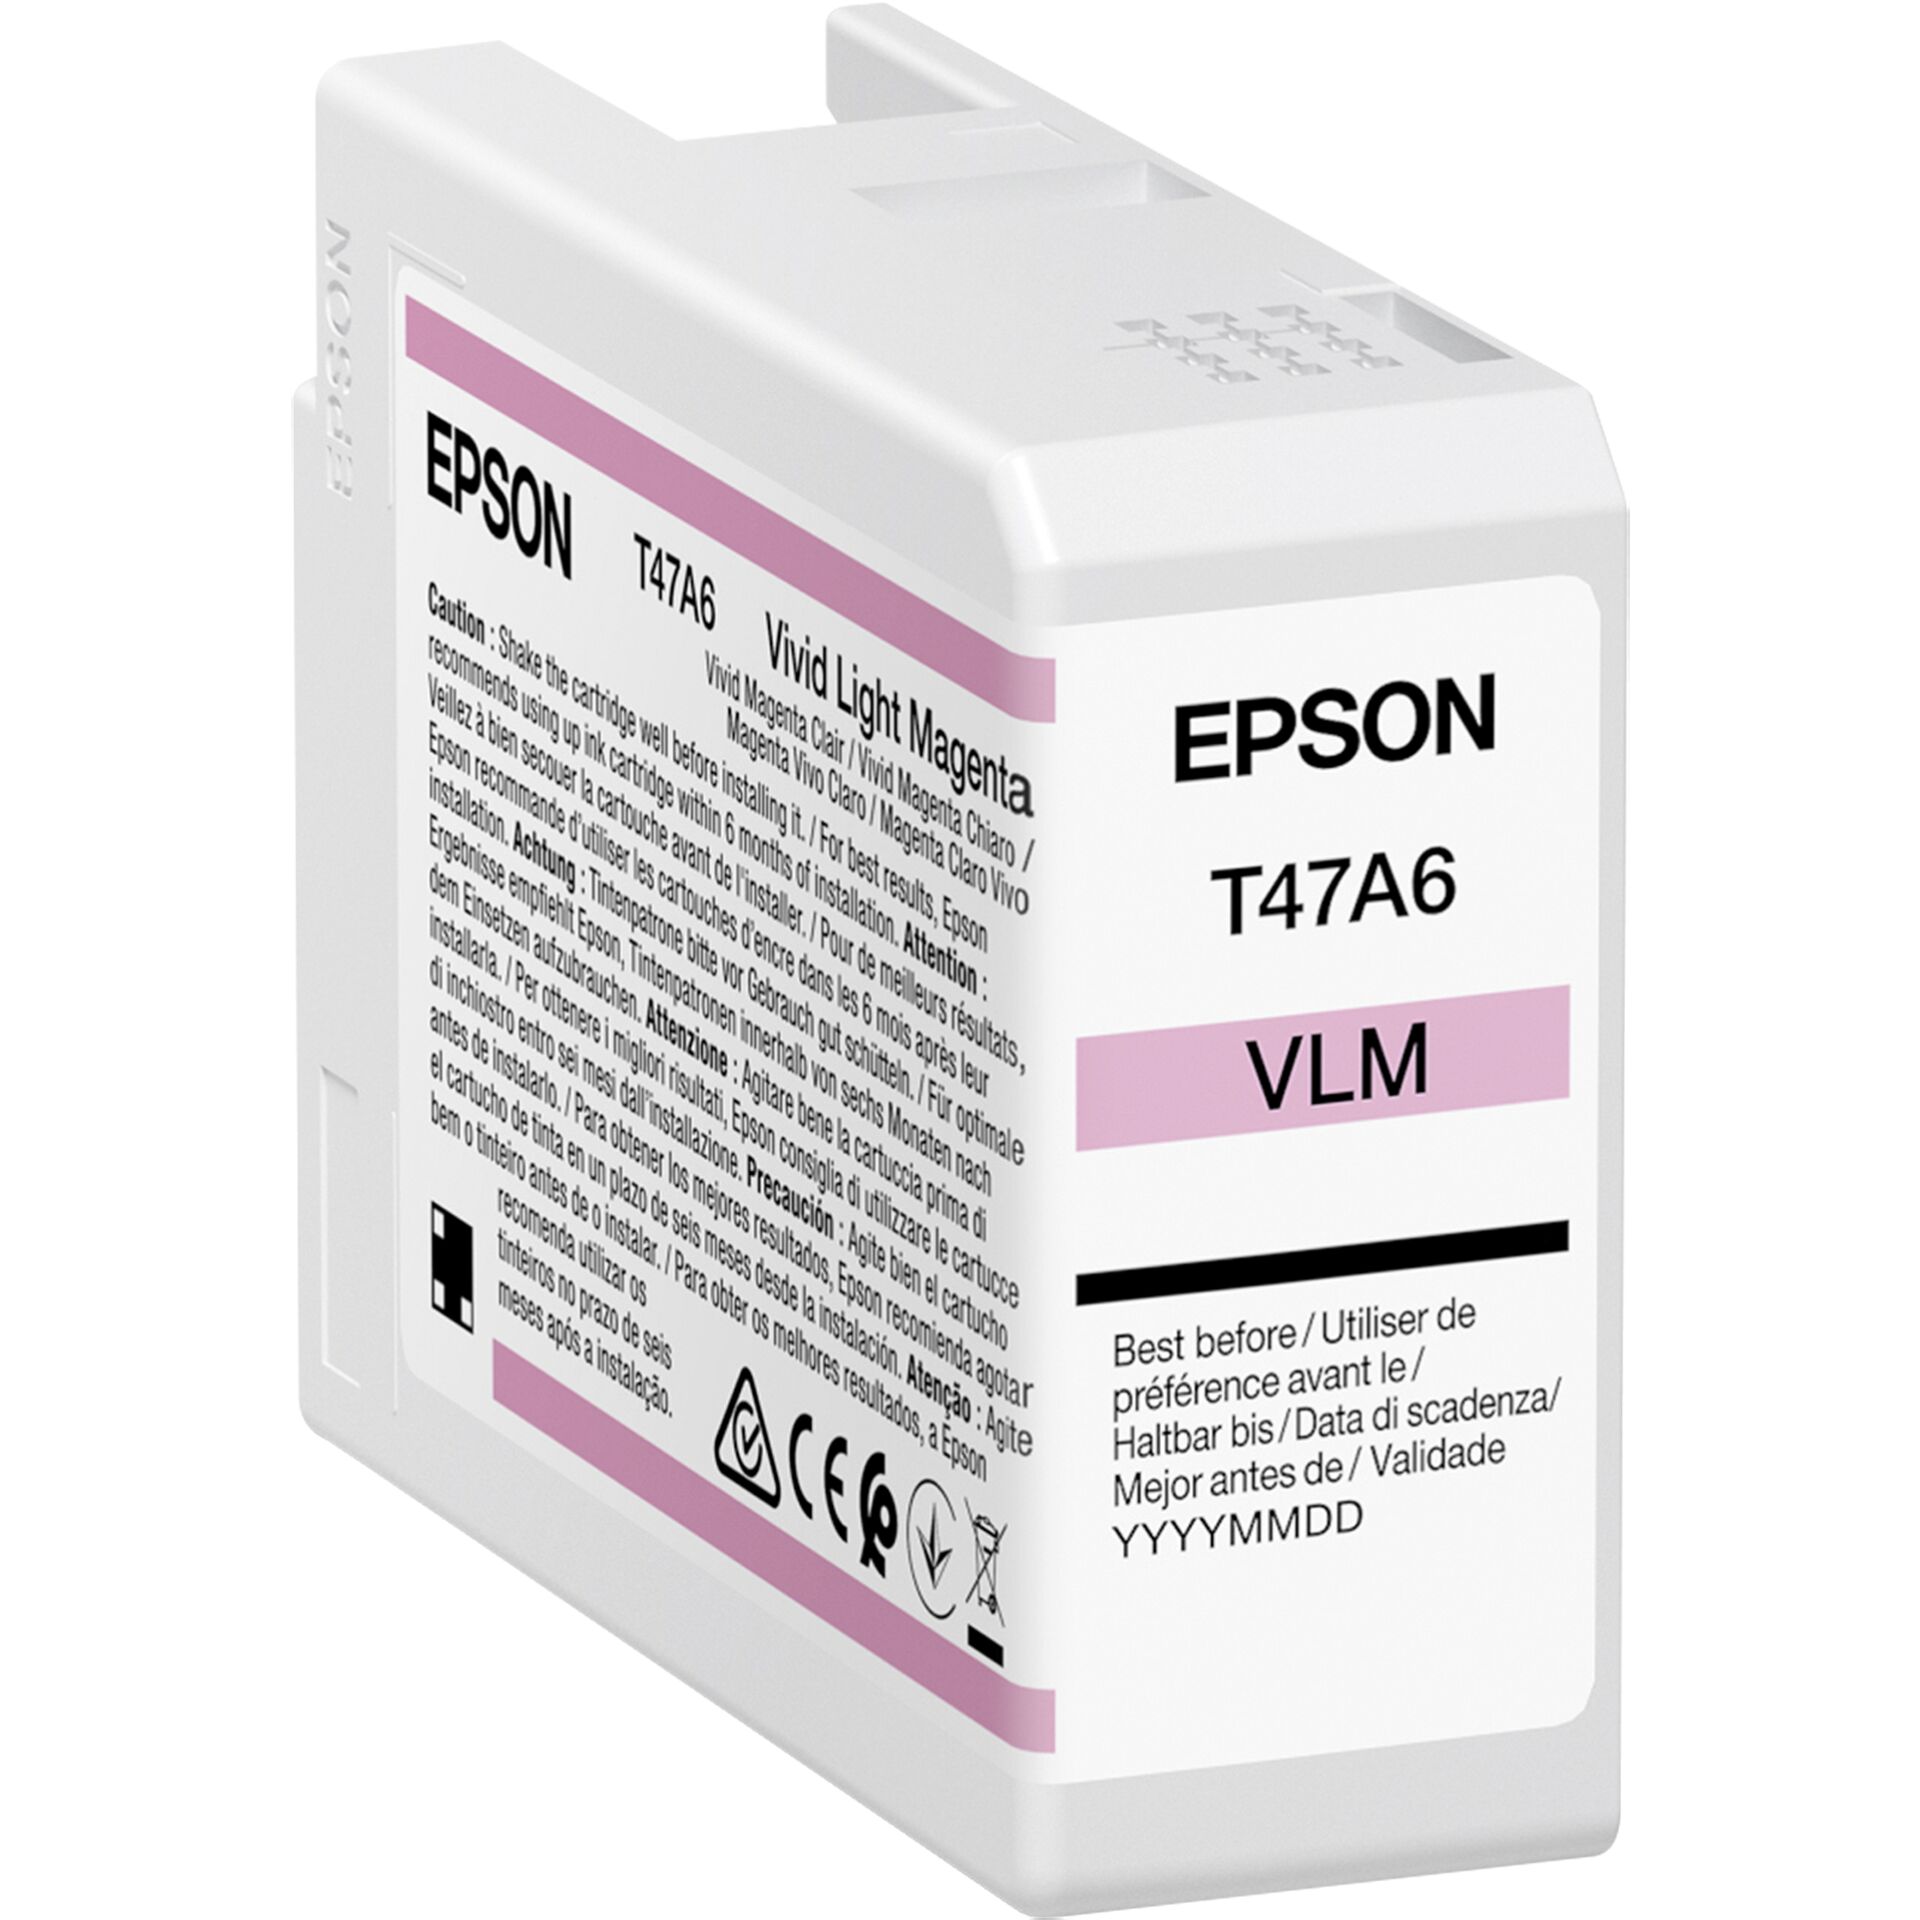 Epson Tinte T47A6 Ultrachrome Pro 10 magenta hell 